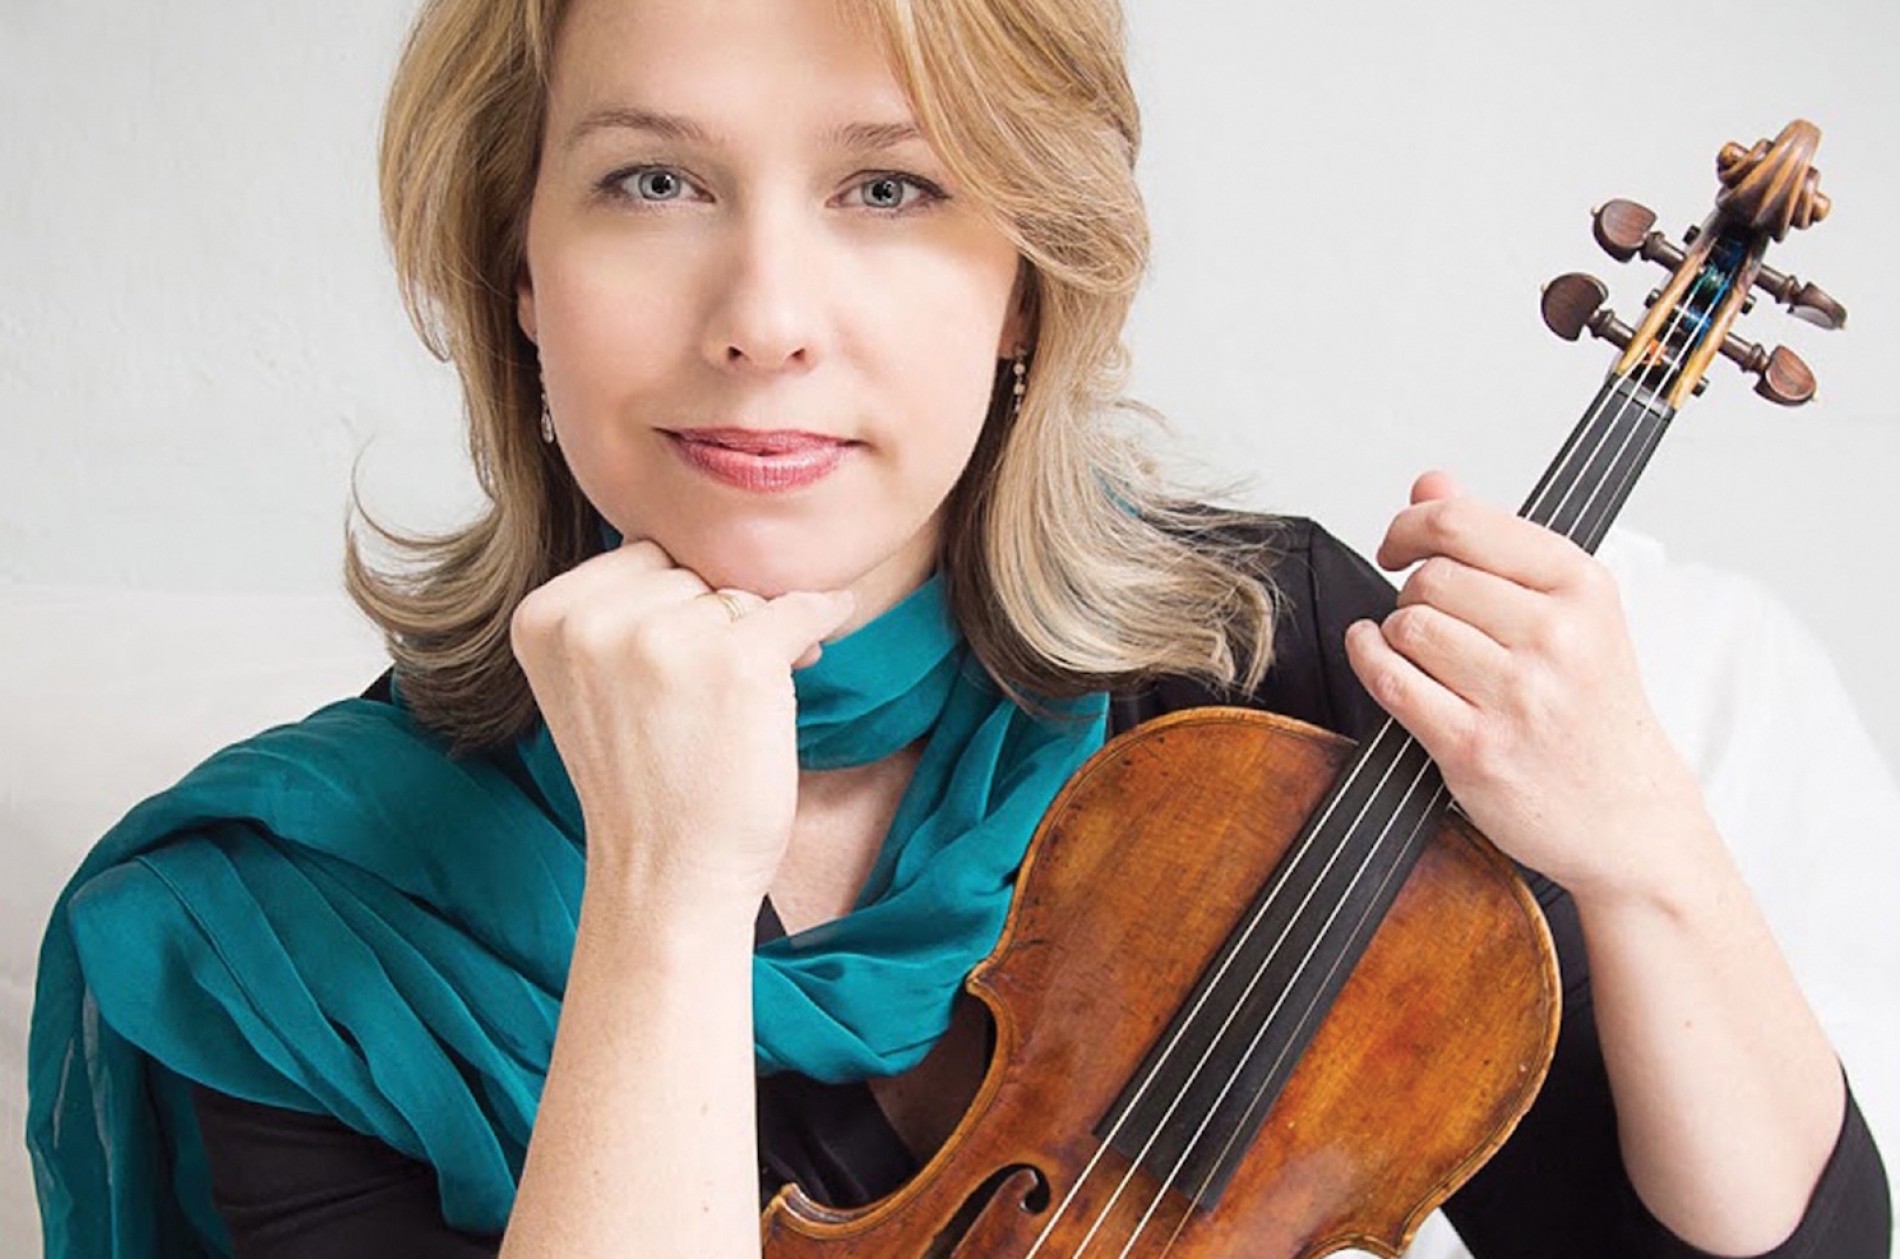 Wearing a black top and teal scarf, a blond woman holds up her violin.